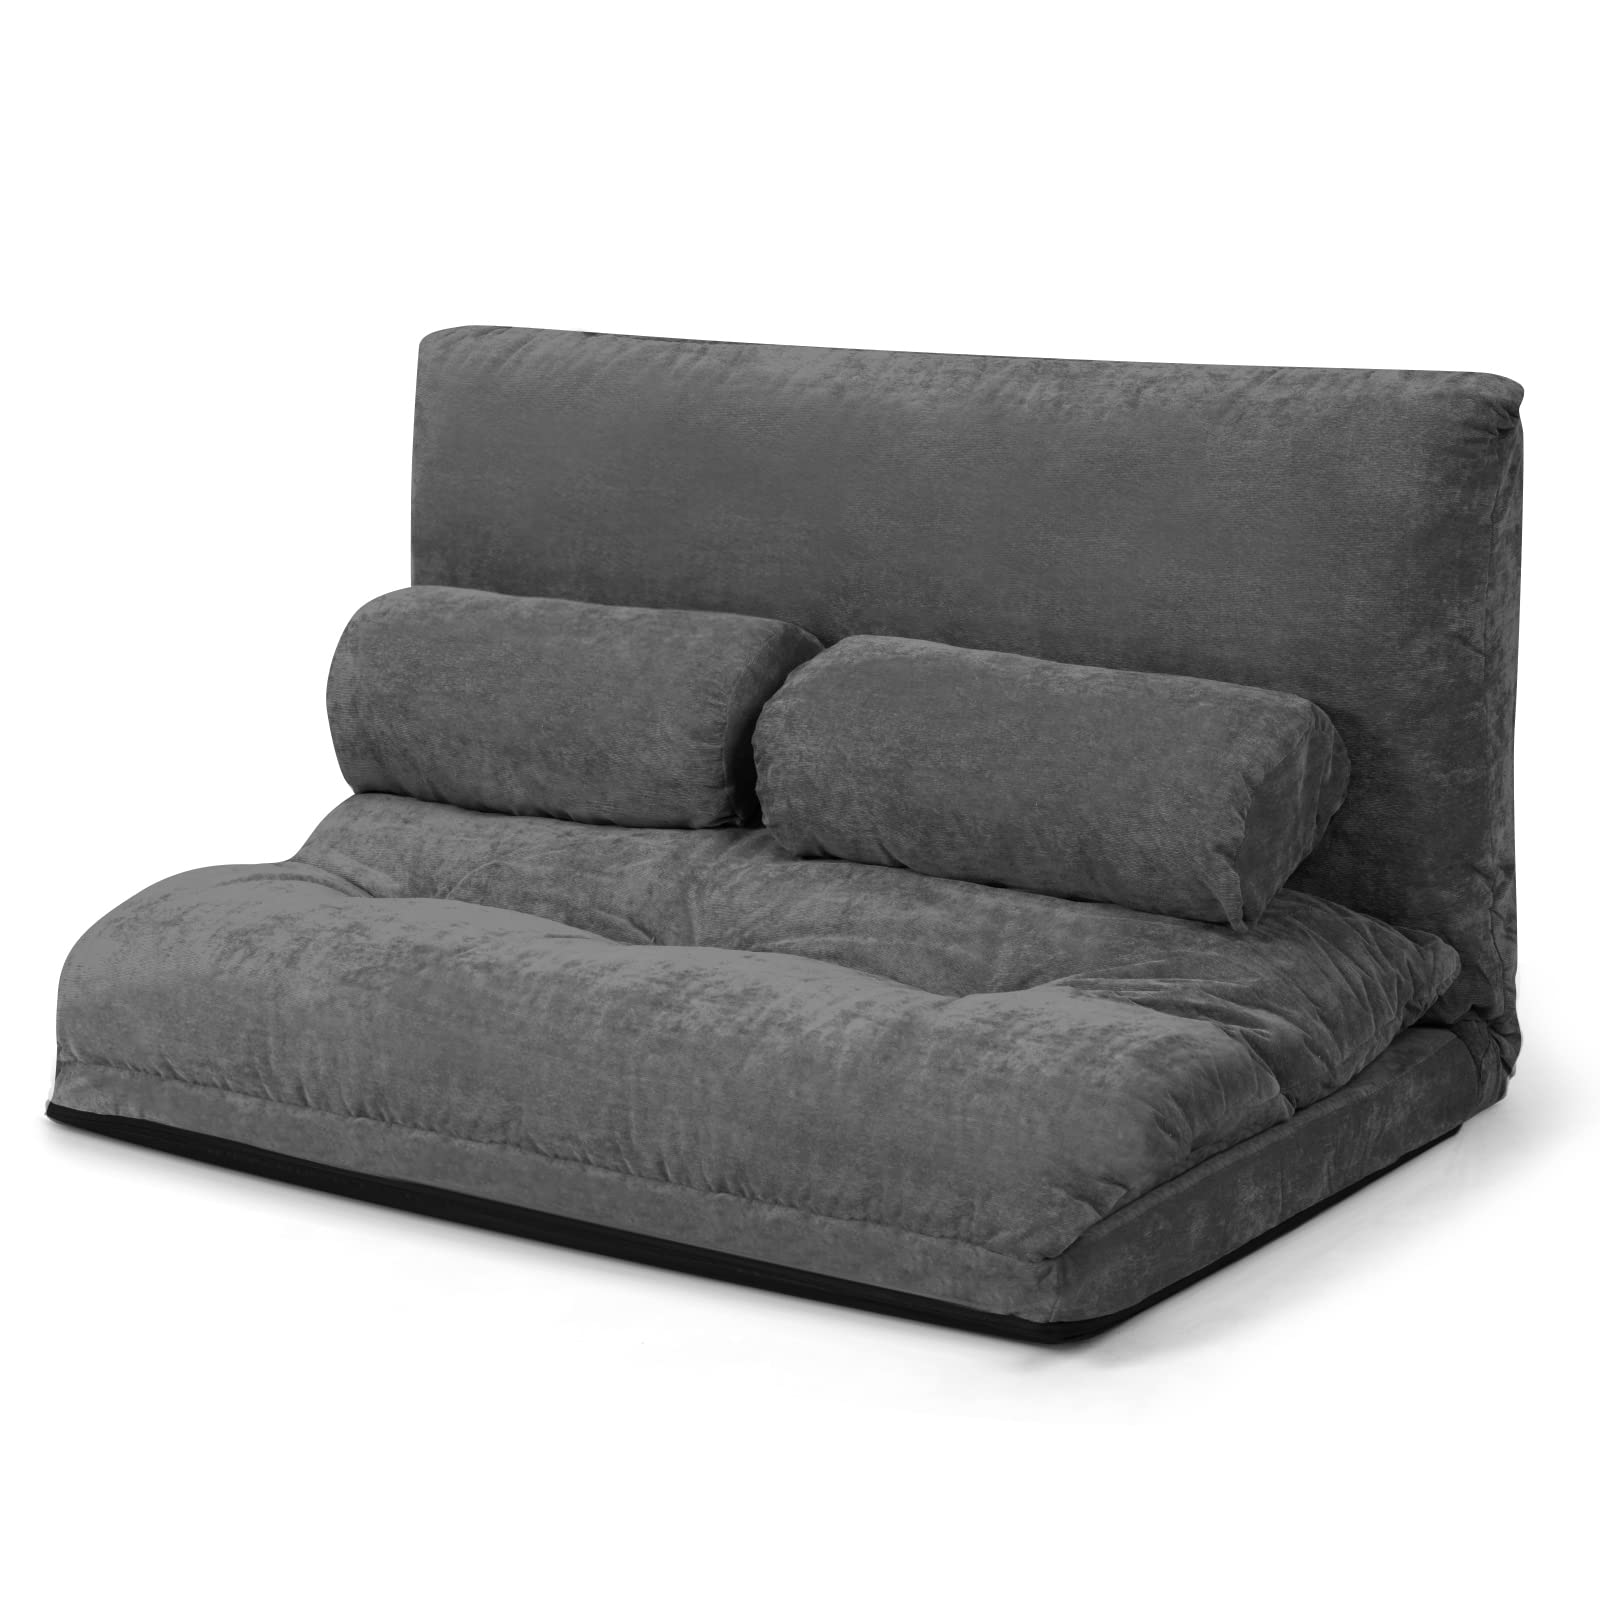 COSTWAY Convertible Floor Sofa Couch with 2 Waist Pillows, Folding 6-Position Adjustable Loveseat with Corduroy Fabric, Metal Frame, Upholstered Floor Couch Lounge for Reading Playing Gaming (Grey)